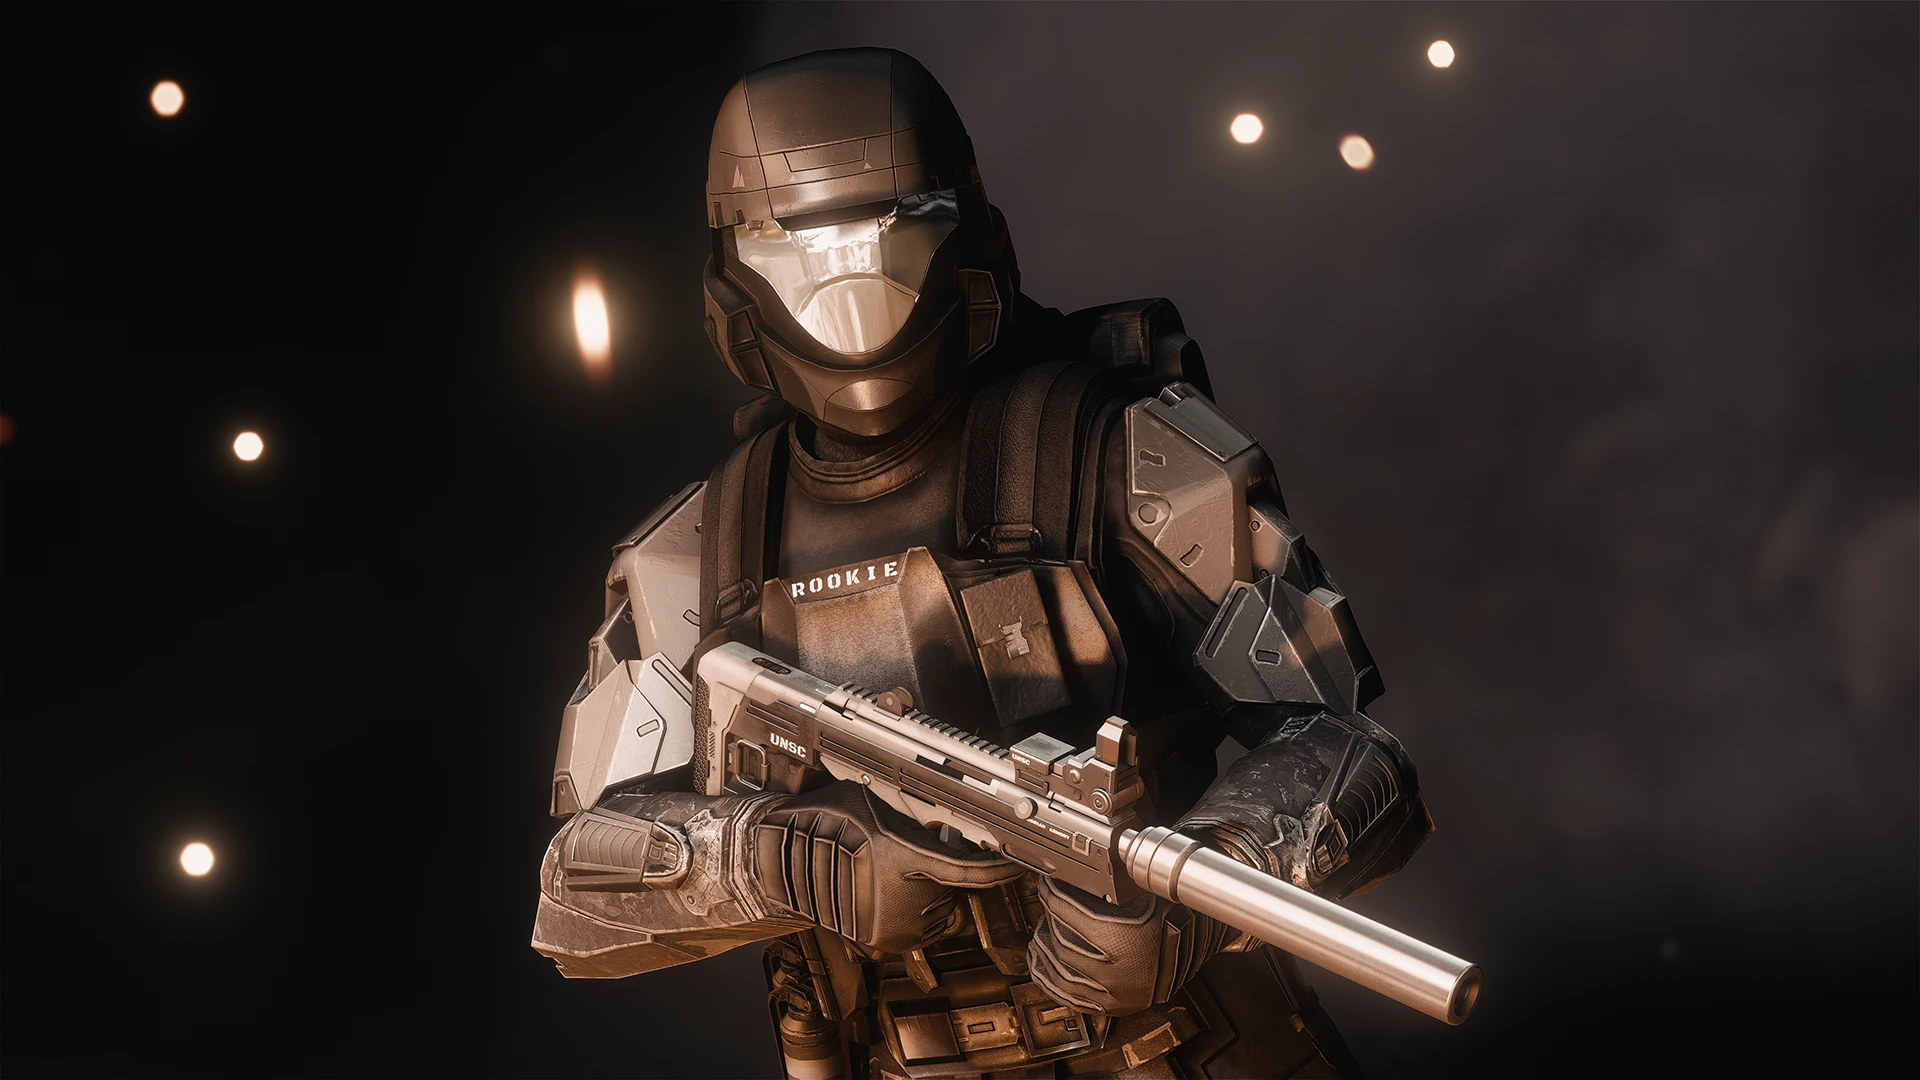 Halo 4 odst armor